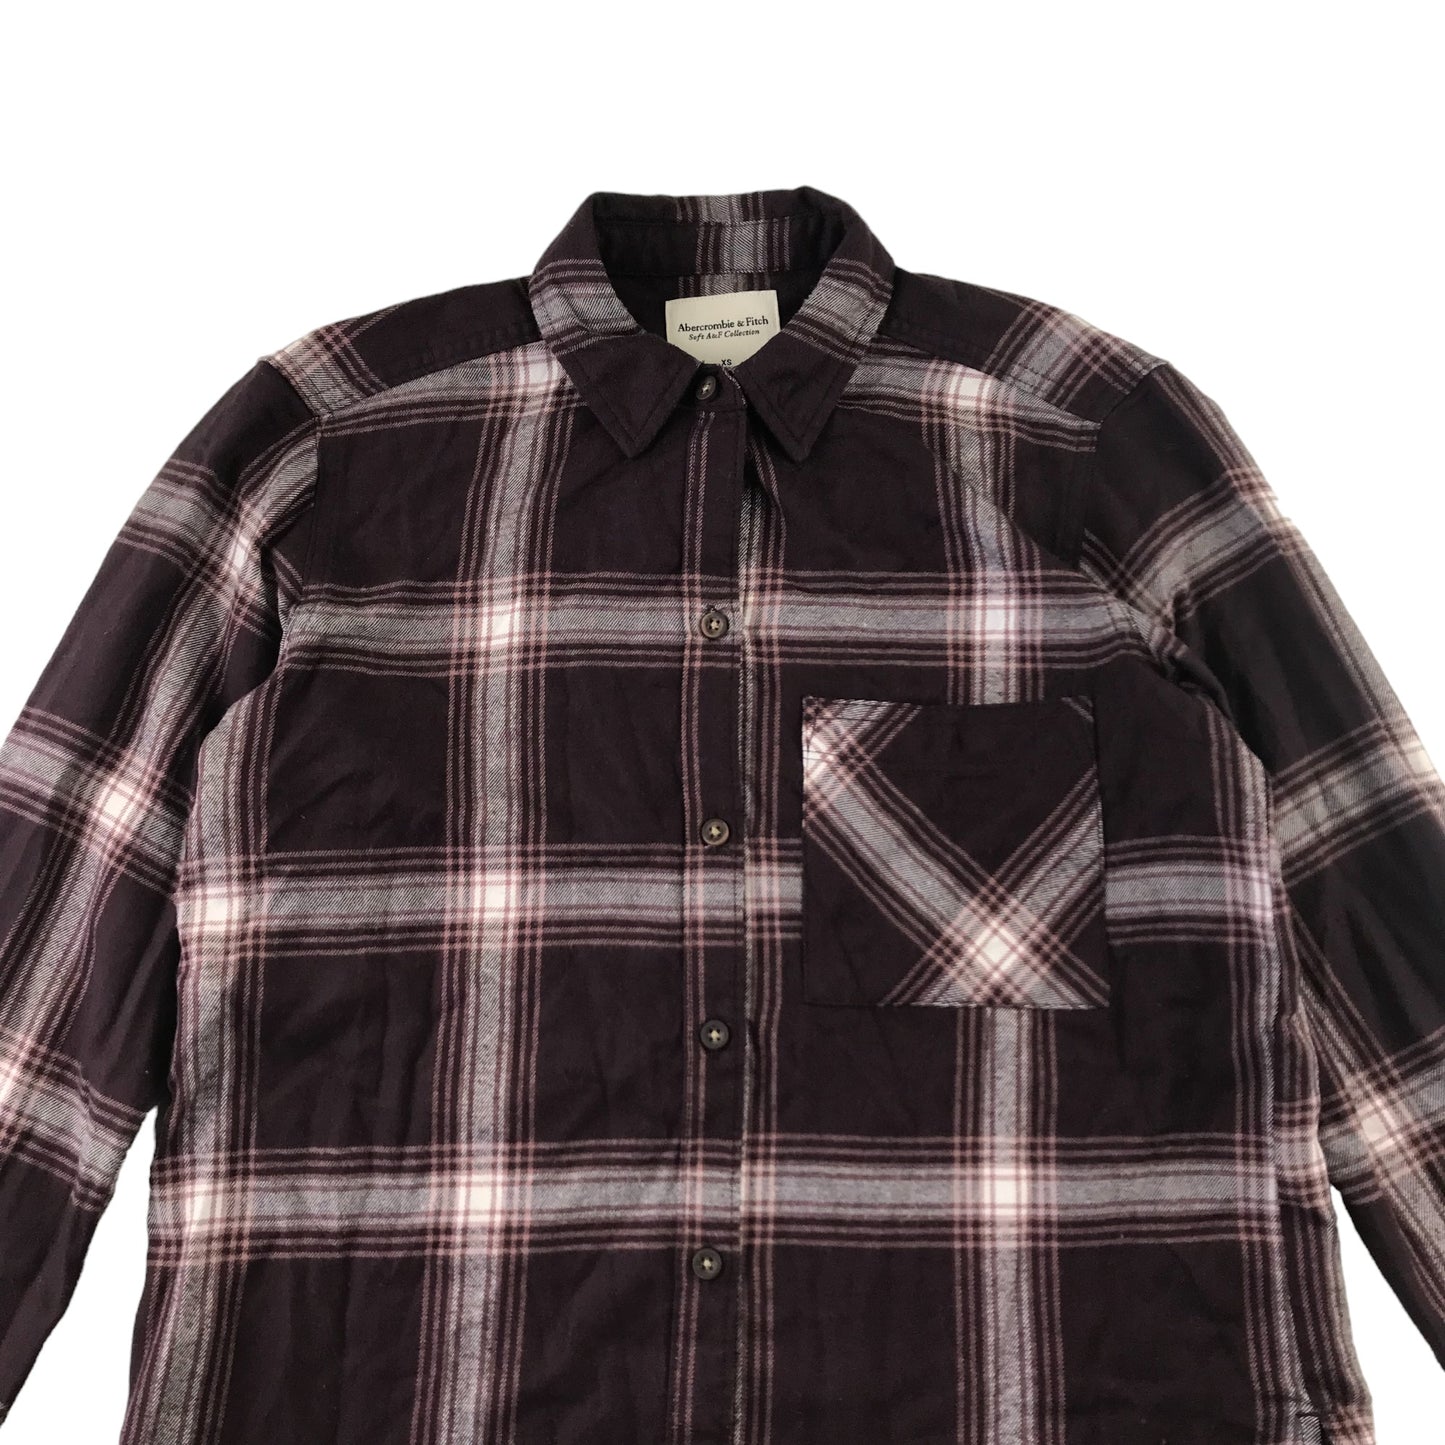 Abercrombie & Fitch Shirt Size Adult XS Dark Burgundy Checked Long Sleeve Button Up